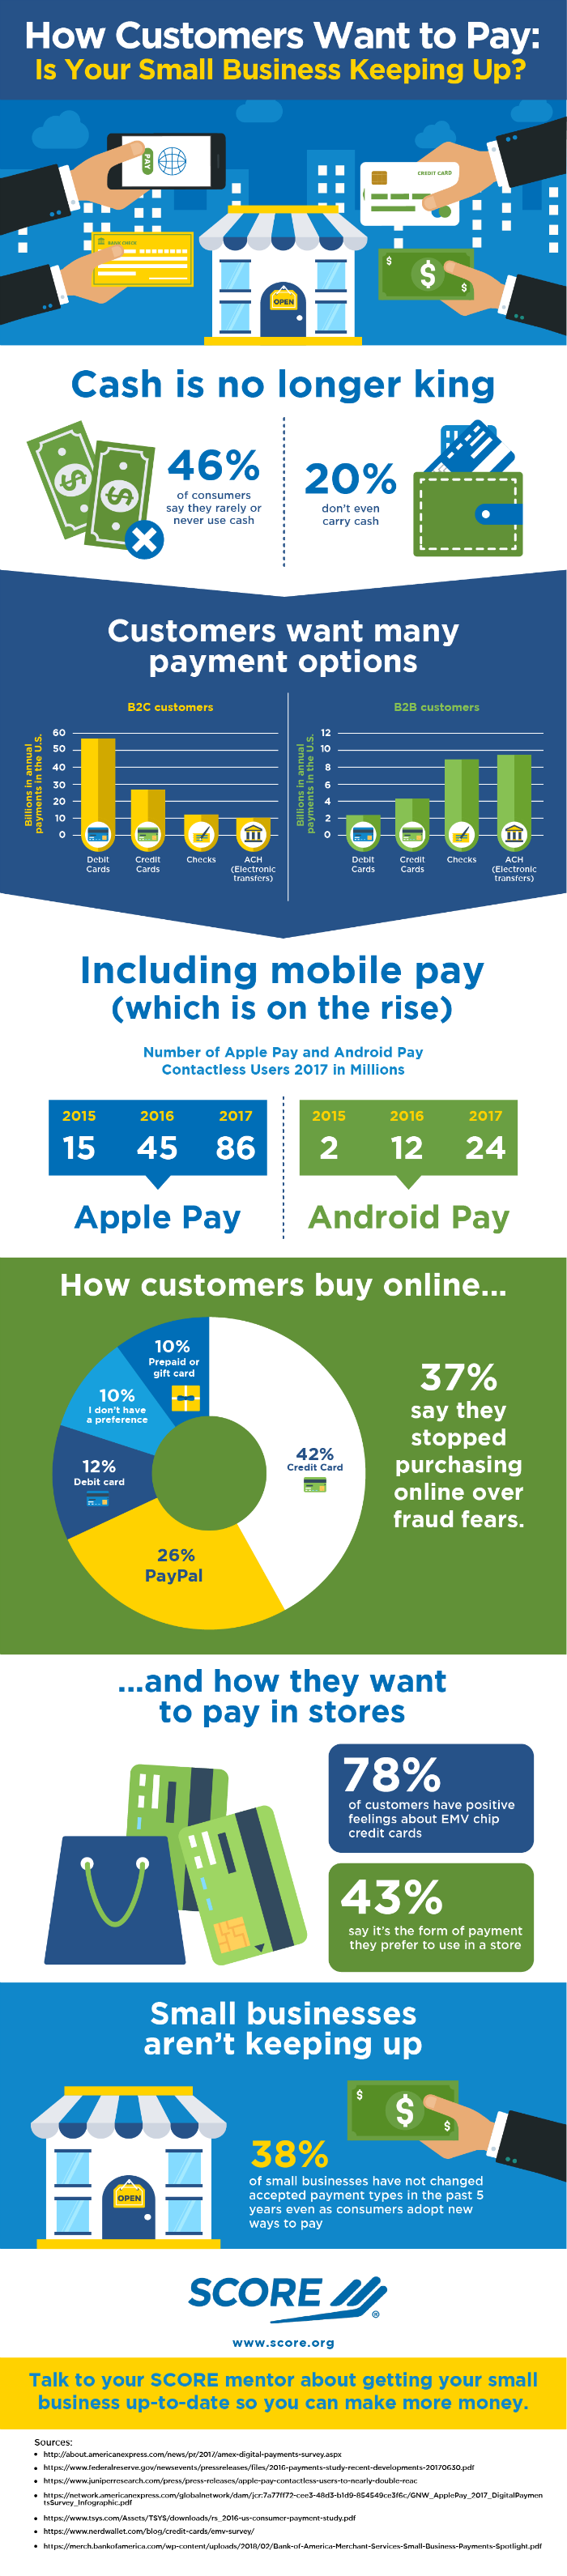 Infographic: New Customer Payment Trends